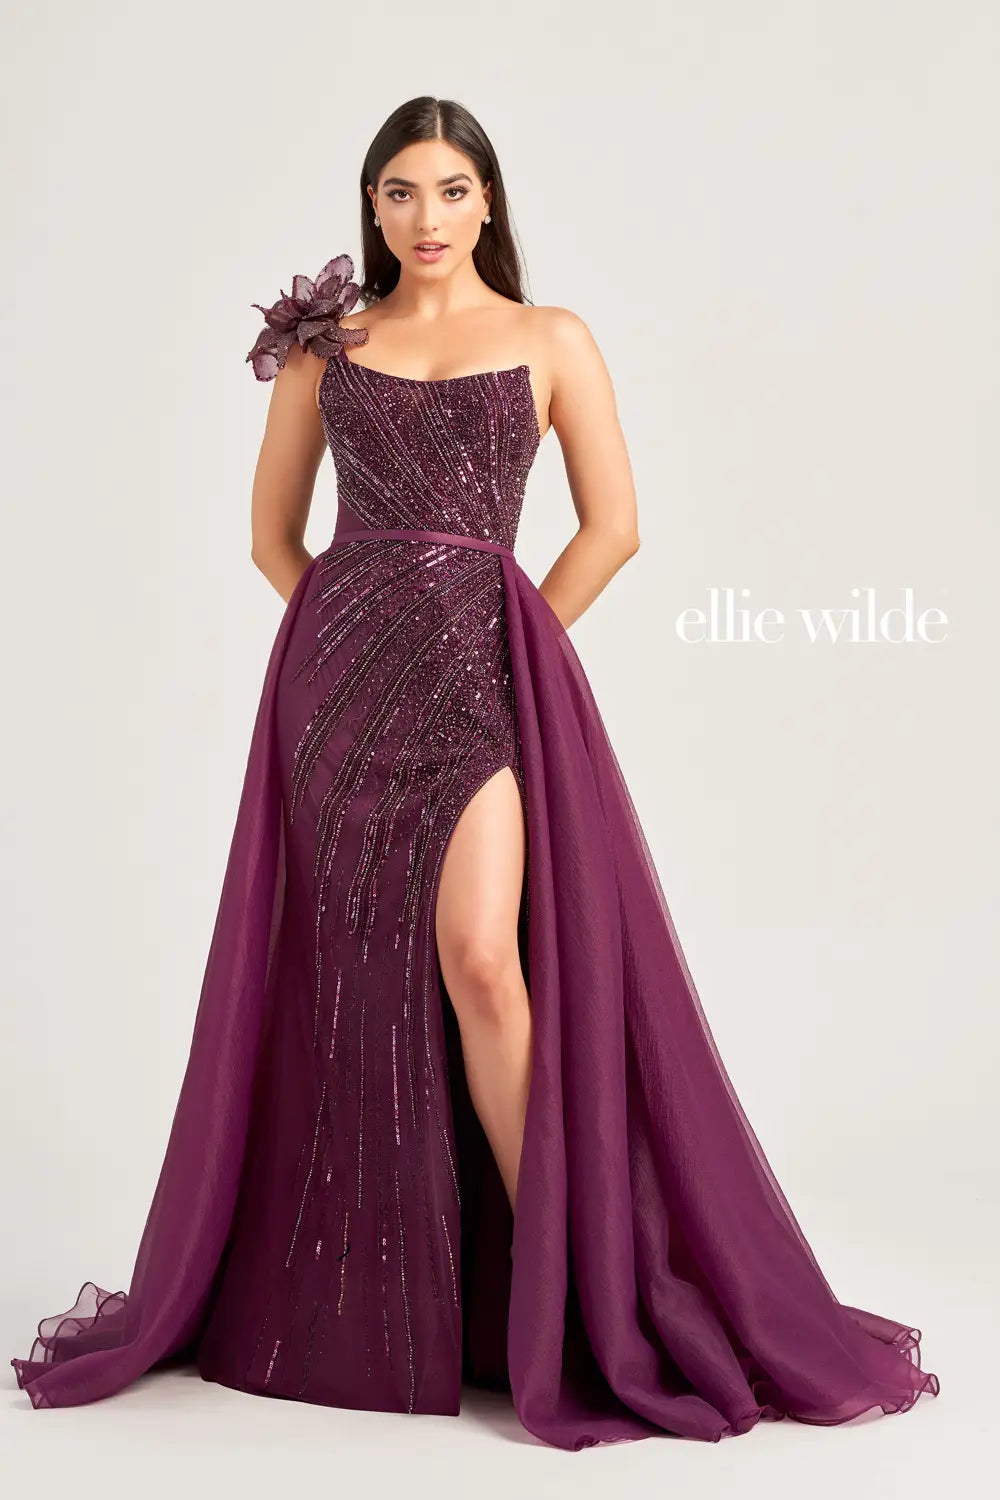 Get ready to turn heads in this stunning Ellie Wilde EW35087 beaded pageant dress. With its shimmering one shoulder bow and elegant scoop neck, this dress exudes sophistication and glamour. The sheer skirt with an organza overskirt and corset lace up back add the perfect touch of drama. Elevate your prom or pageant look with this show-stopping gown.  Sizes: 00-20  Colors: Tan, Aubergine